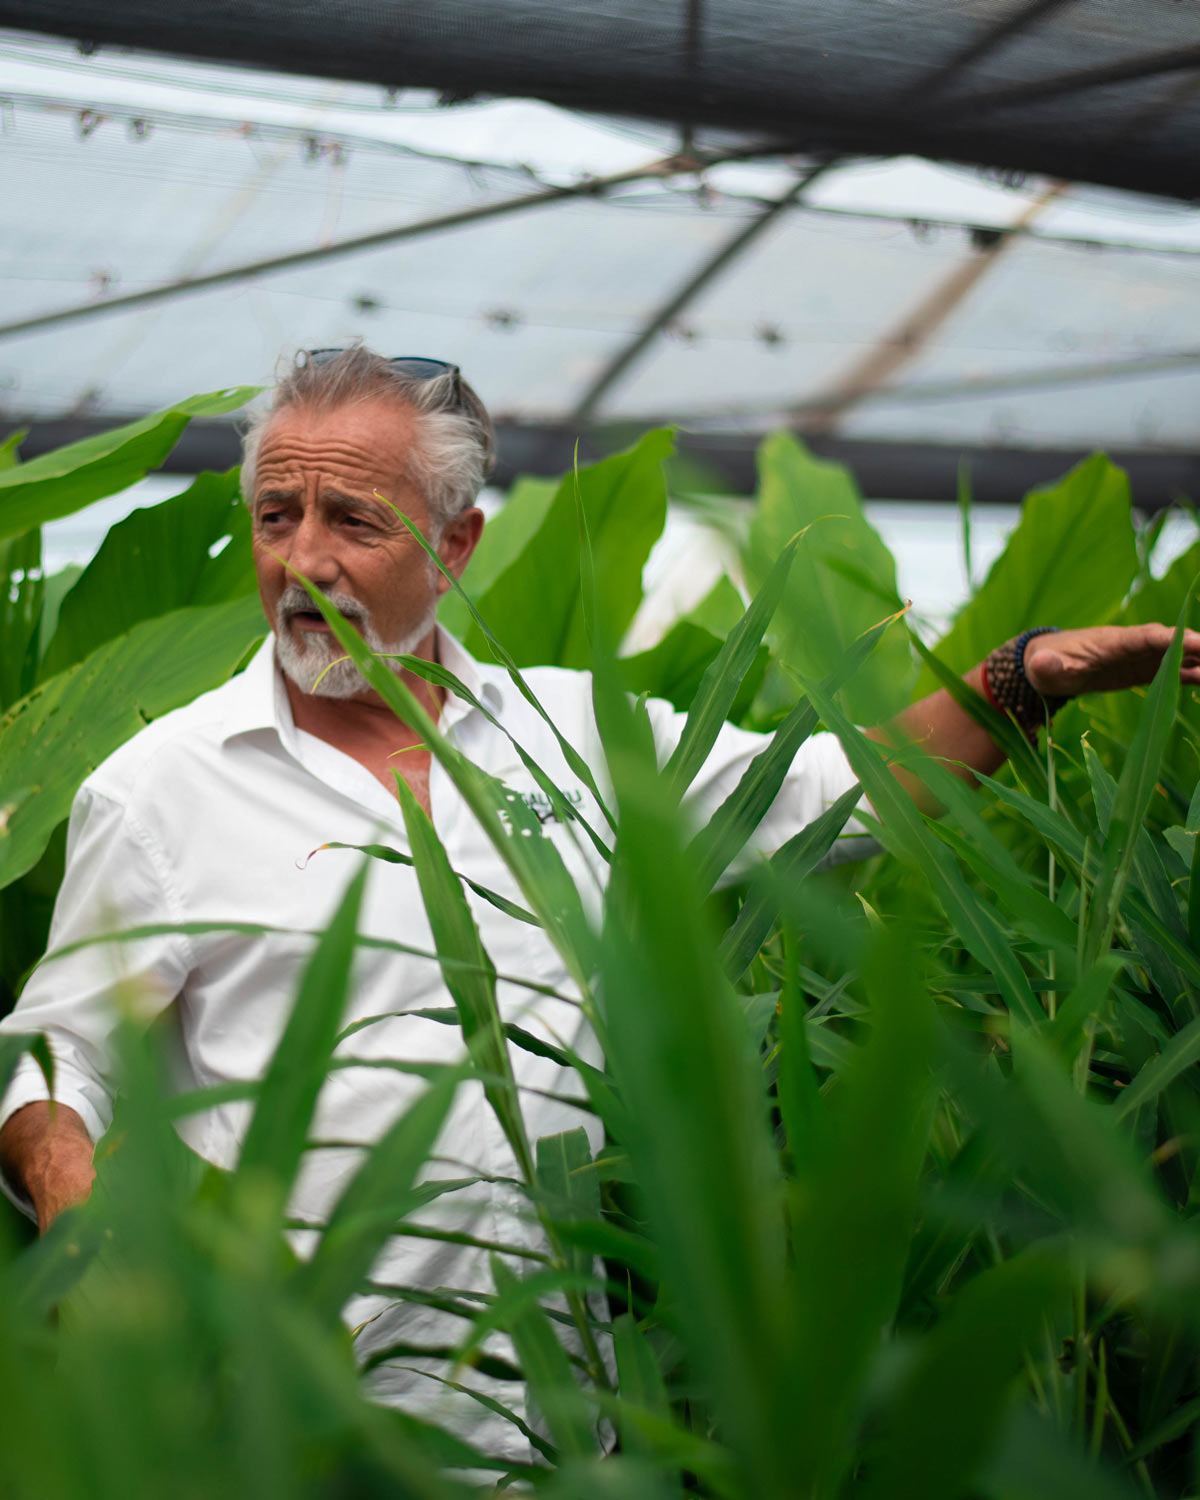 Galuku team member, Andrew, standing among hydroponic ginger and turmeric crops